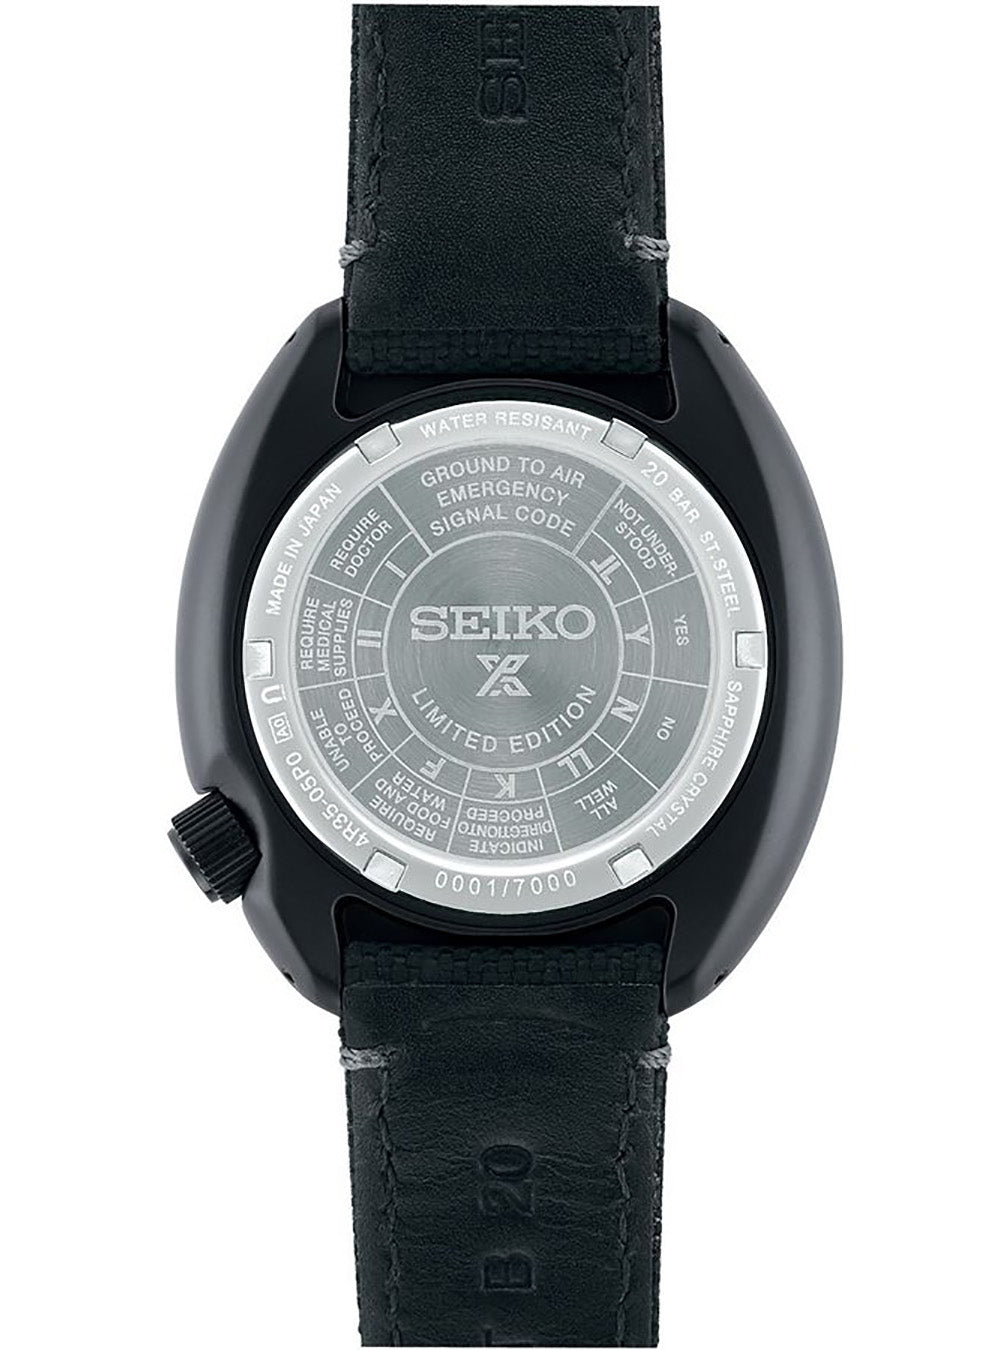 SEIKO PROSPEX THE BLACK SERIE LIMITED EDITION SBDY121 MADE IN JAPAN JDMWatchesjapan-select